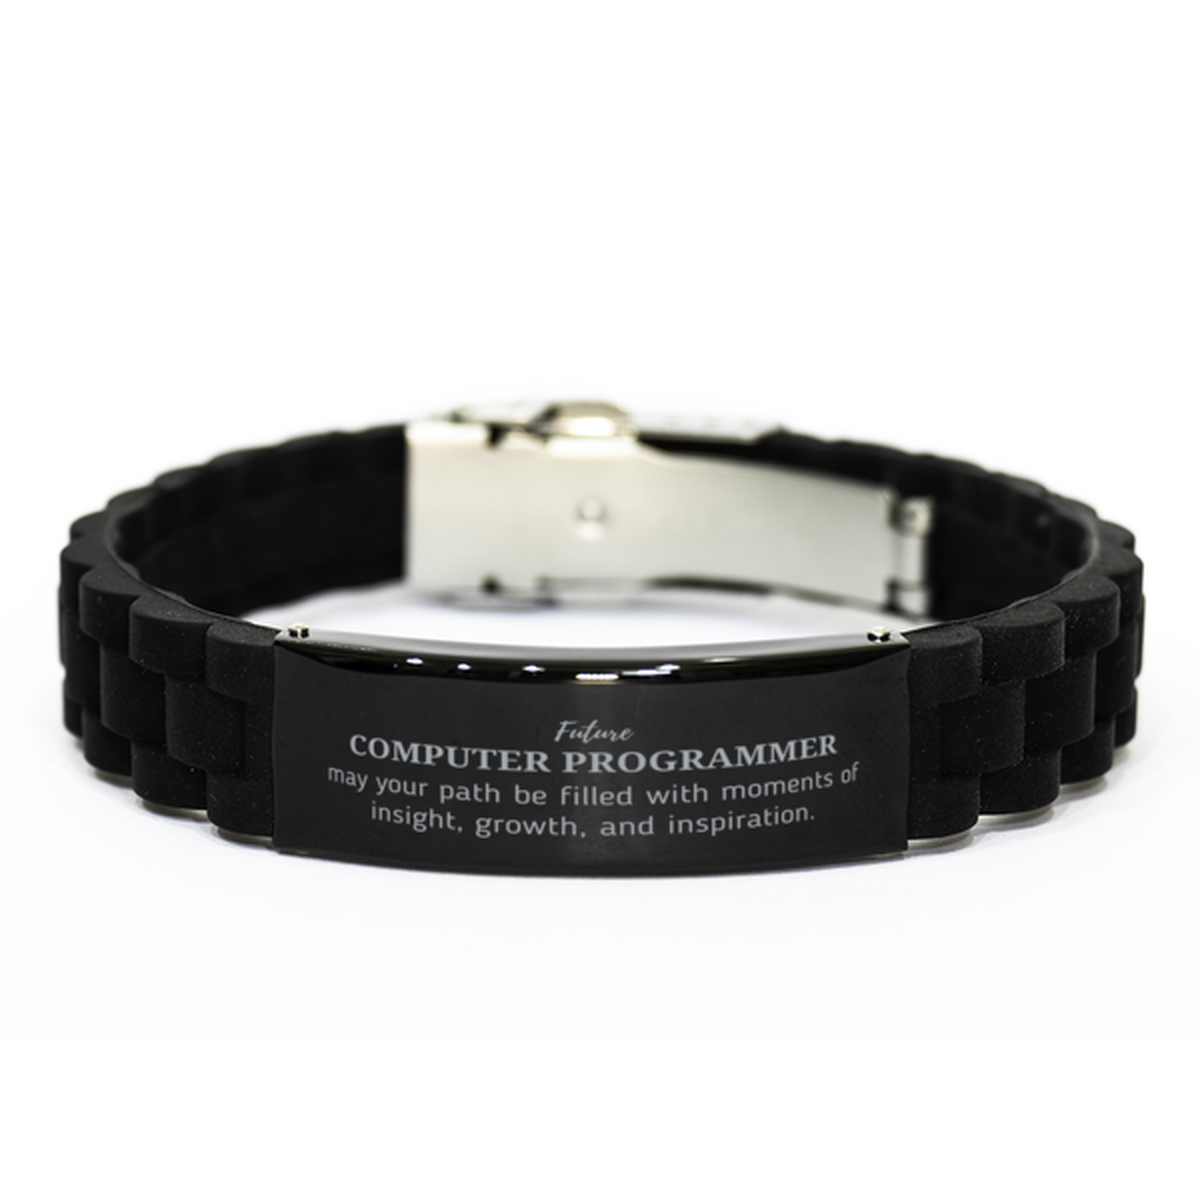 Future Computer Programmer Gifts, May your path be filled with moments of insight, Graduation Gifts for New Computer Programmer, Christmas Unique Black Glidelock Clasp Bracelet For Men, Women, Friends